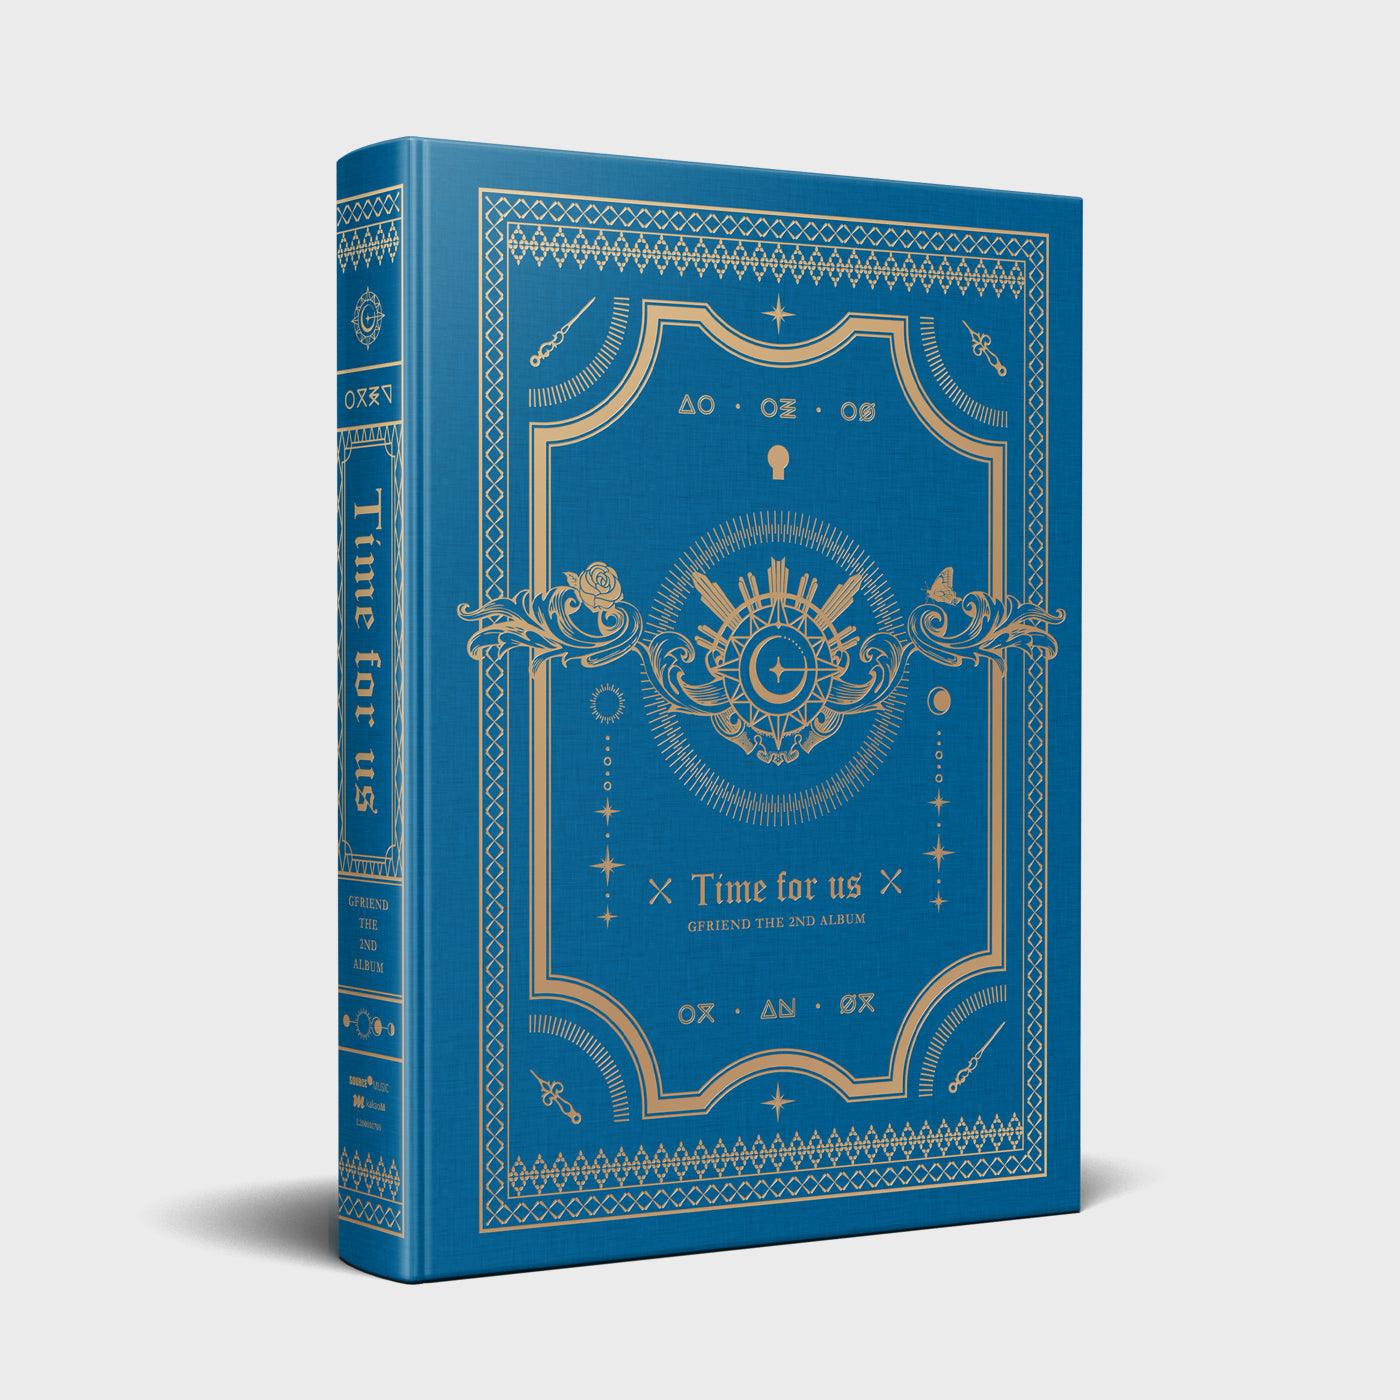 GFRIEND 2ND ALBUM 'TIME FOR US' LIMITED EDITION 